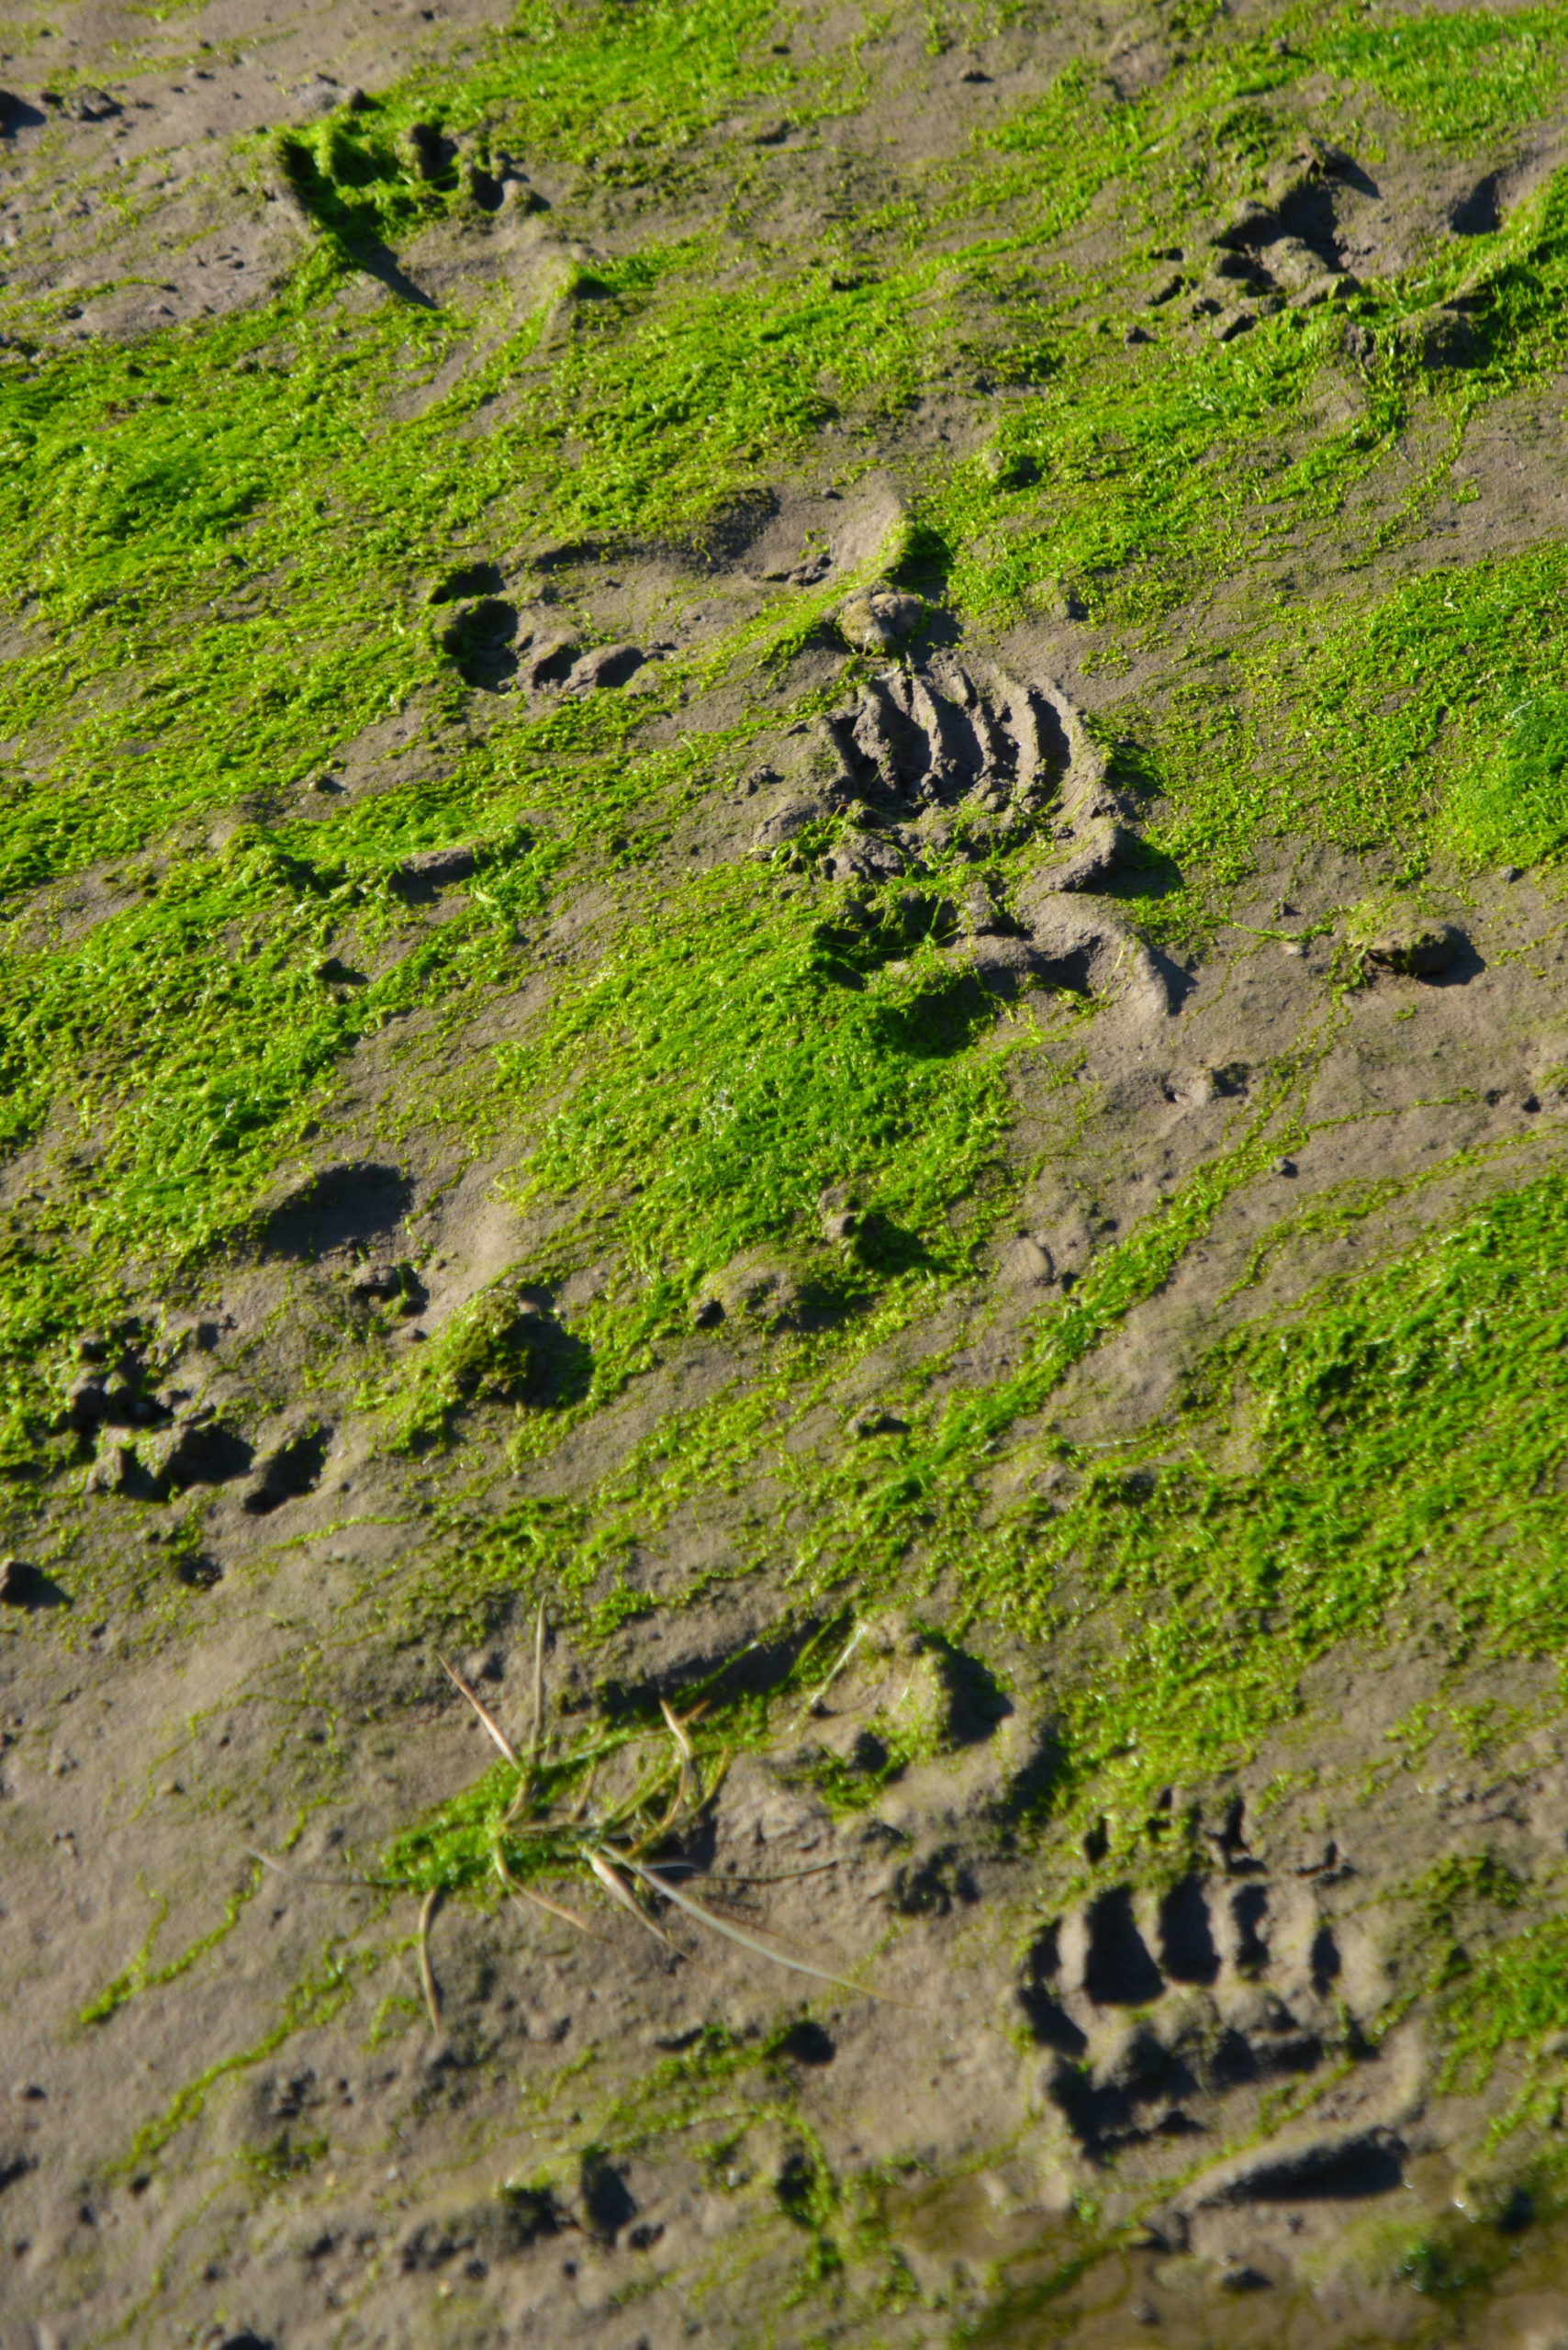 Fresh brown bear tracks were evident in this photo taken along a northern Admiralty Island stream which supports a salmon run during a recent stretch of sunny weather in early September. The bears were apparently searching for salmon entering the stream near the end of the summer salmon run.(Courtesy Photo / Jerry Reinwand)